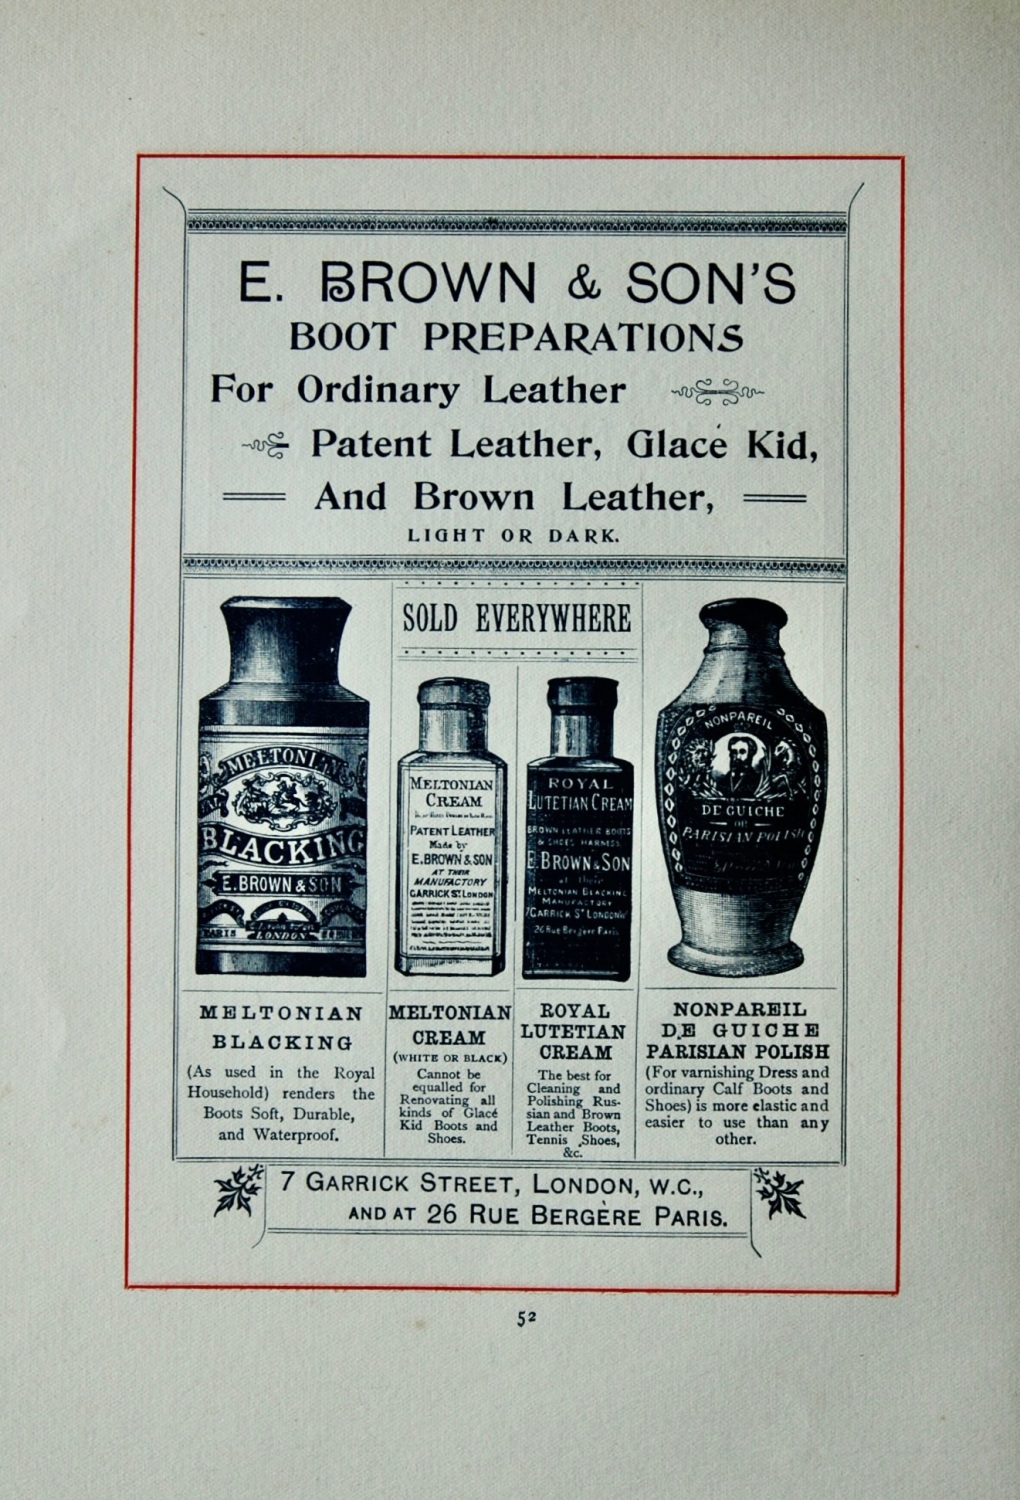 E. Brown & Son's.  7 Garrick Street, London, W.C., and at 26 Rue Bergere Pa